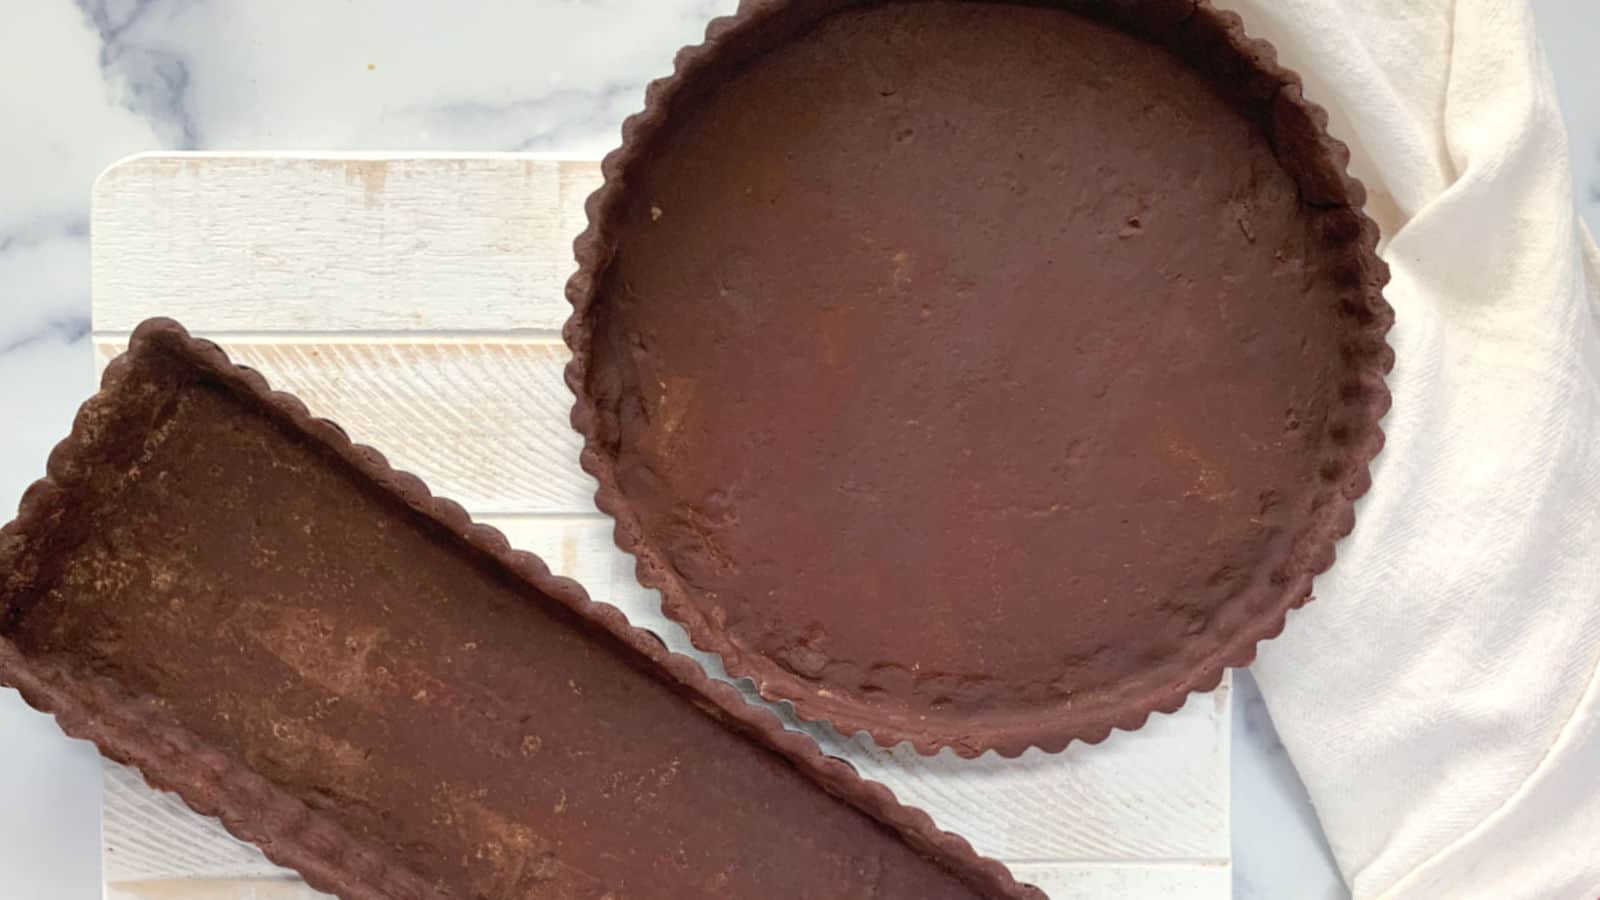 Two chocolate tart crusts on a white board.